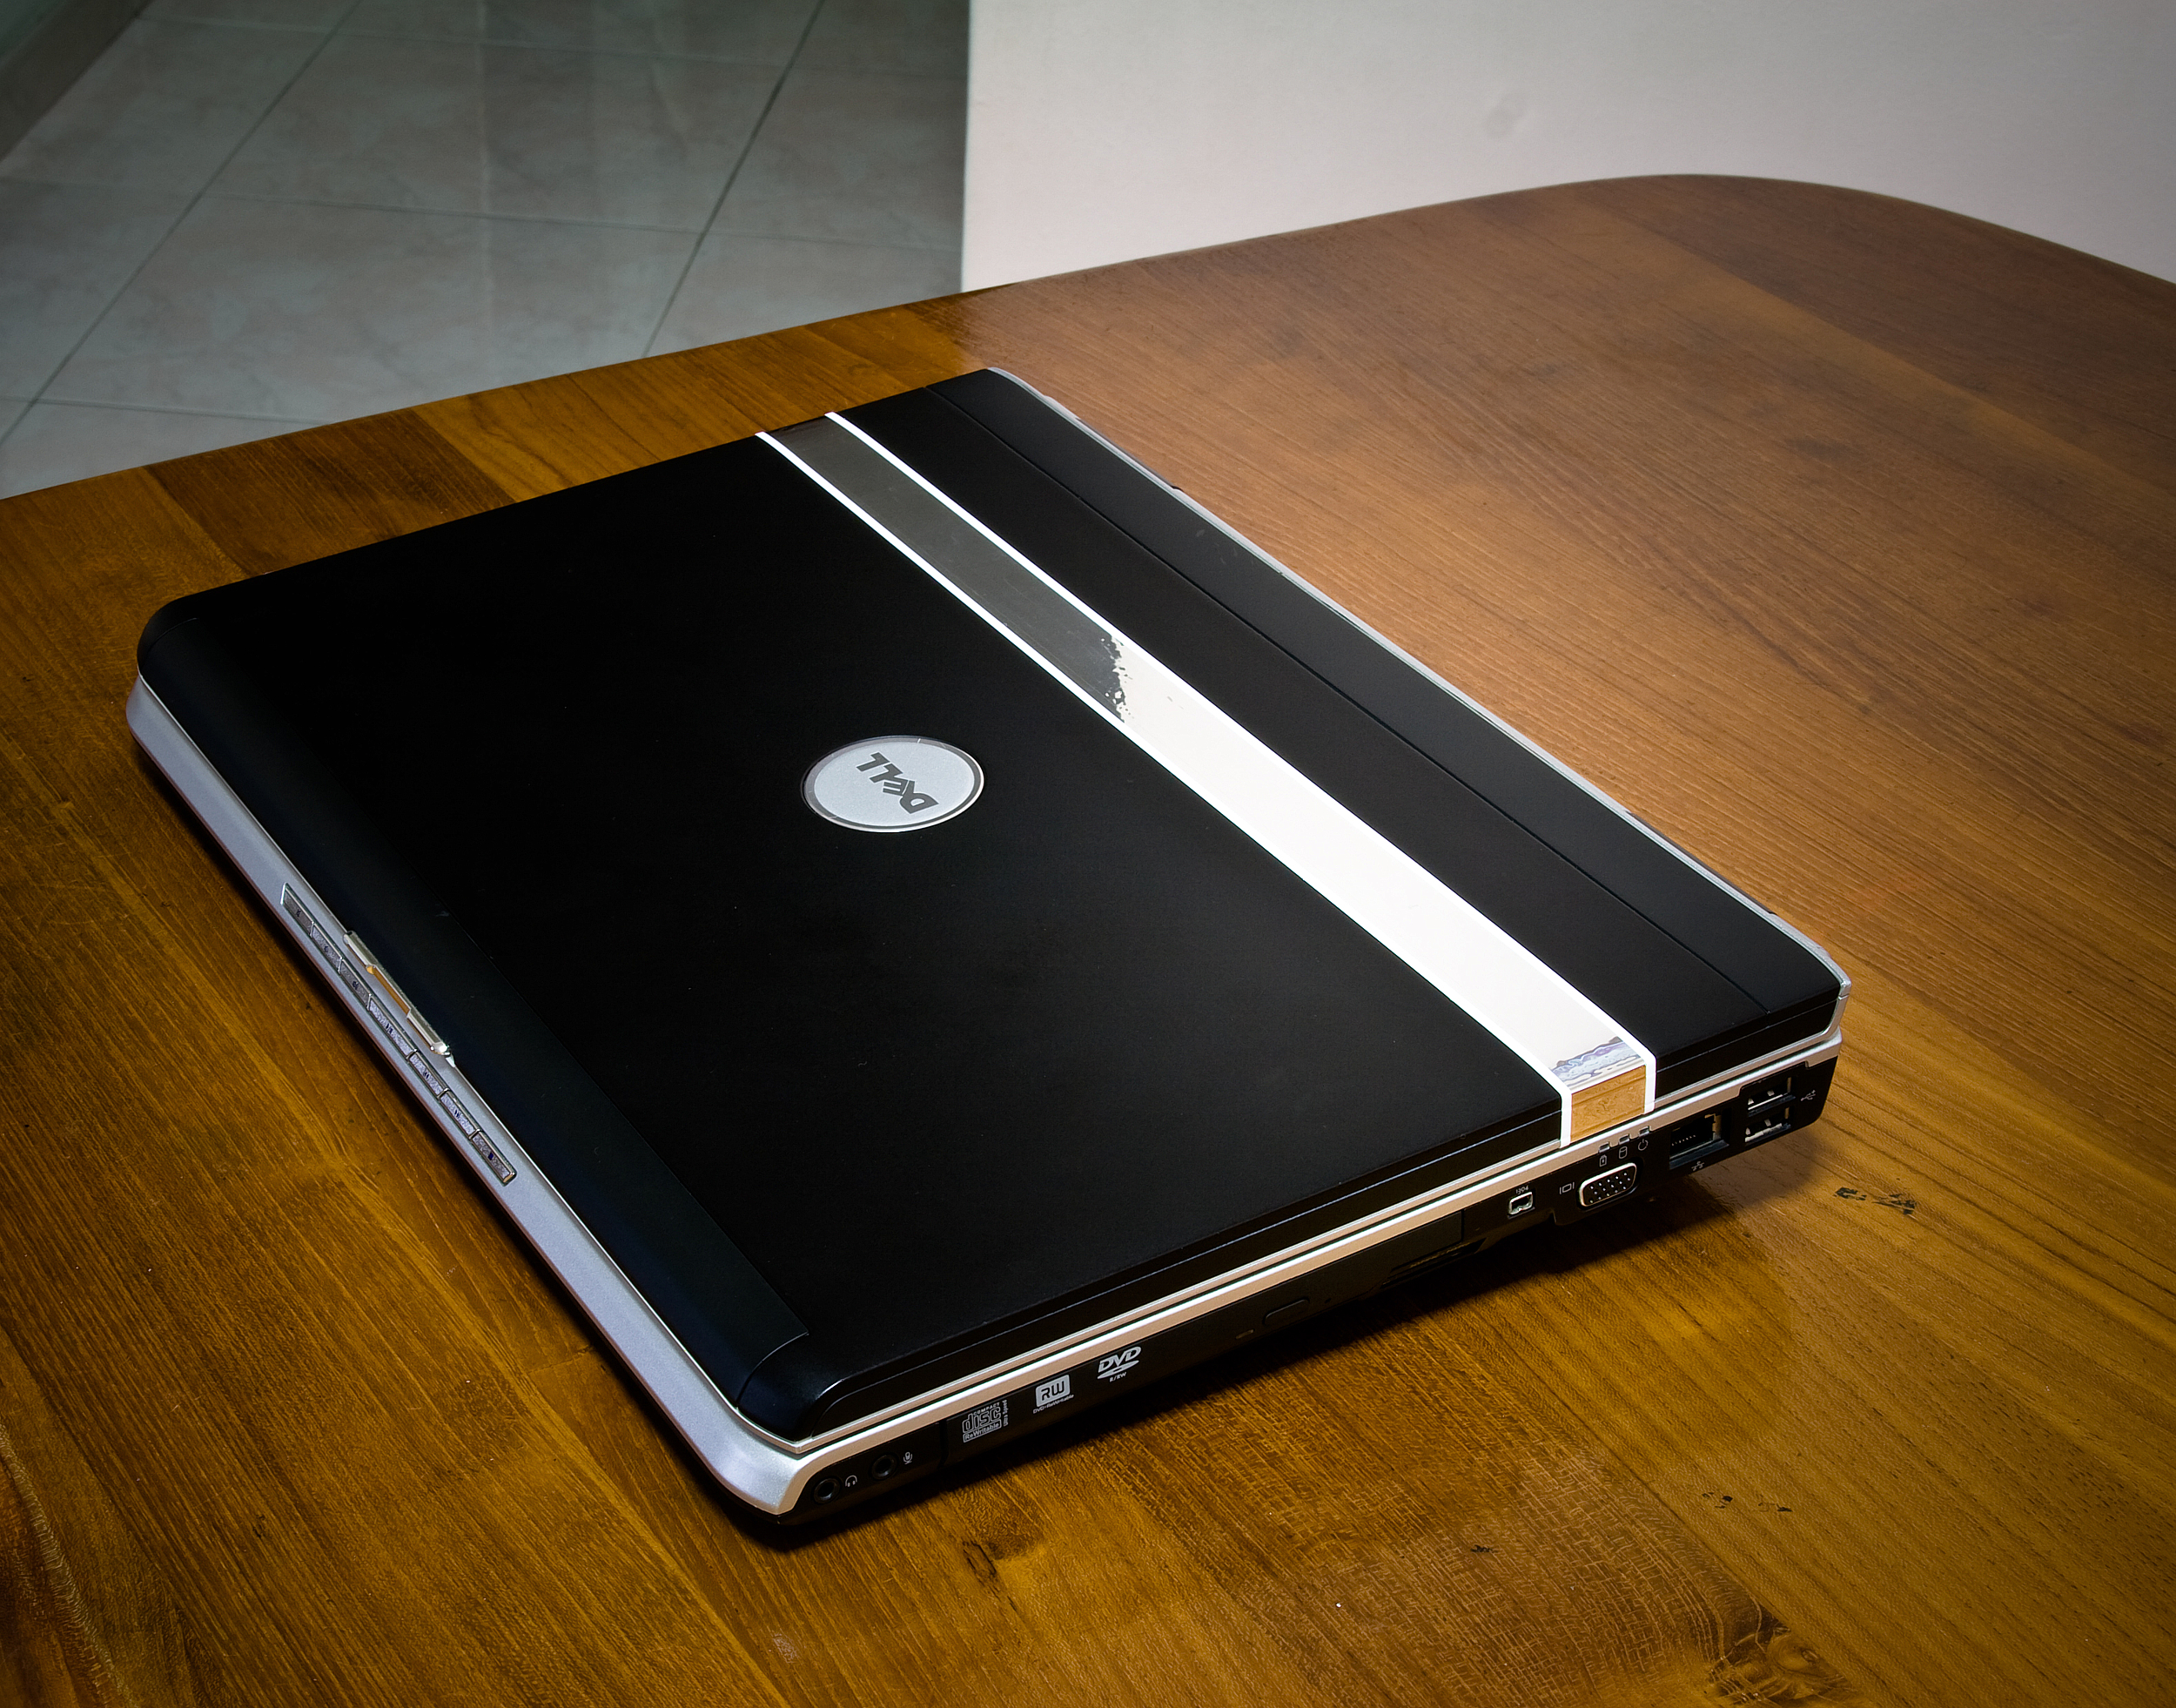 Dislike your boring looking Jet Black laptop? Here's a simple mod